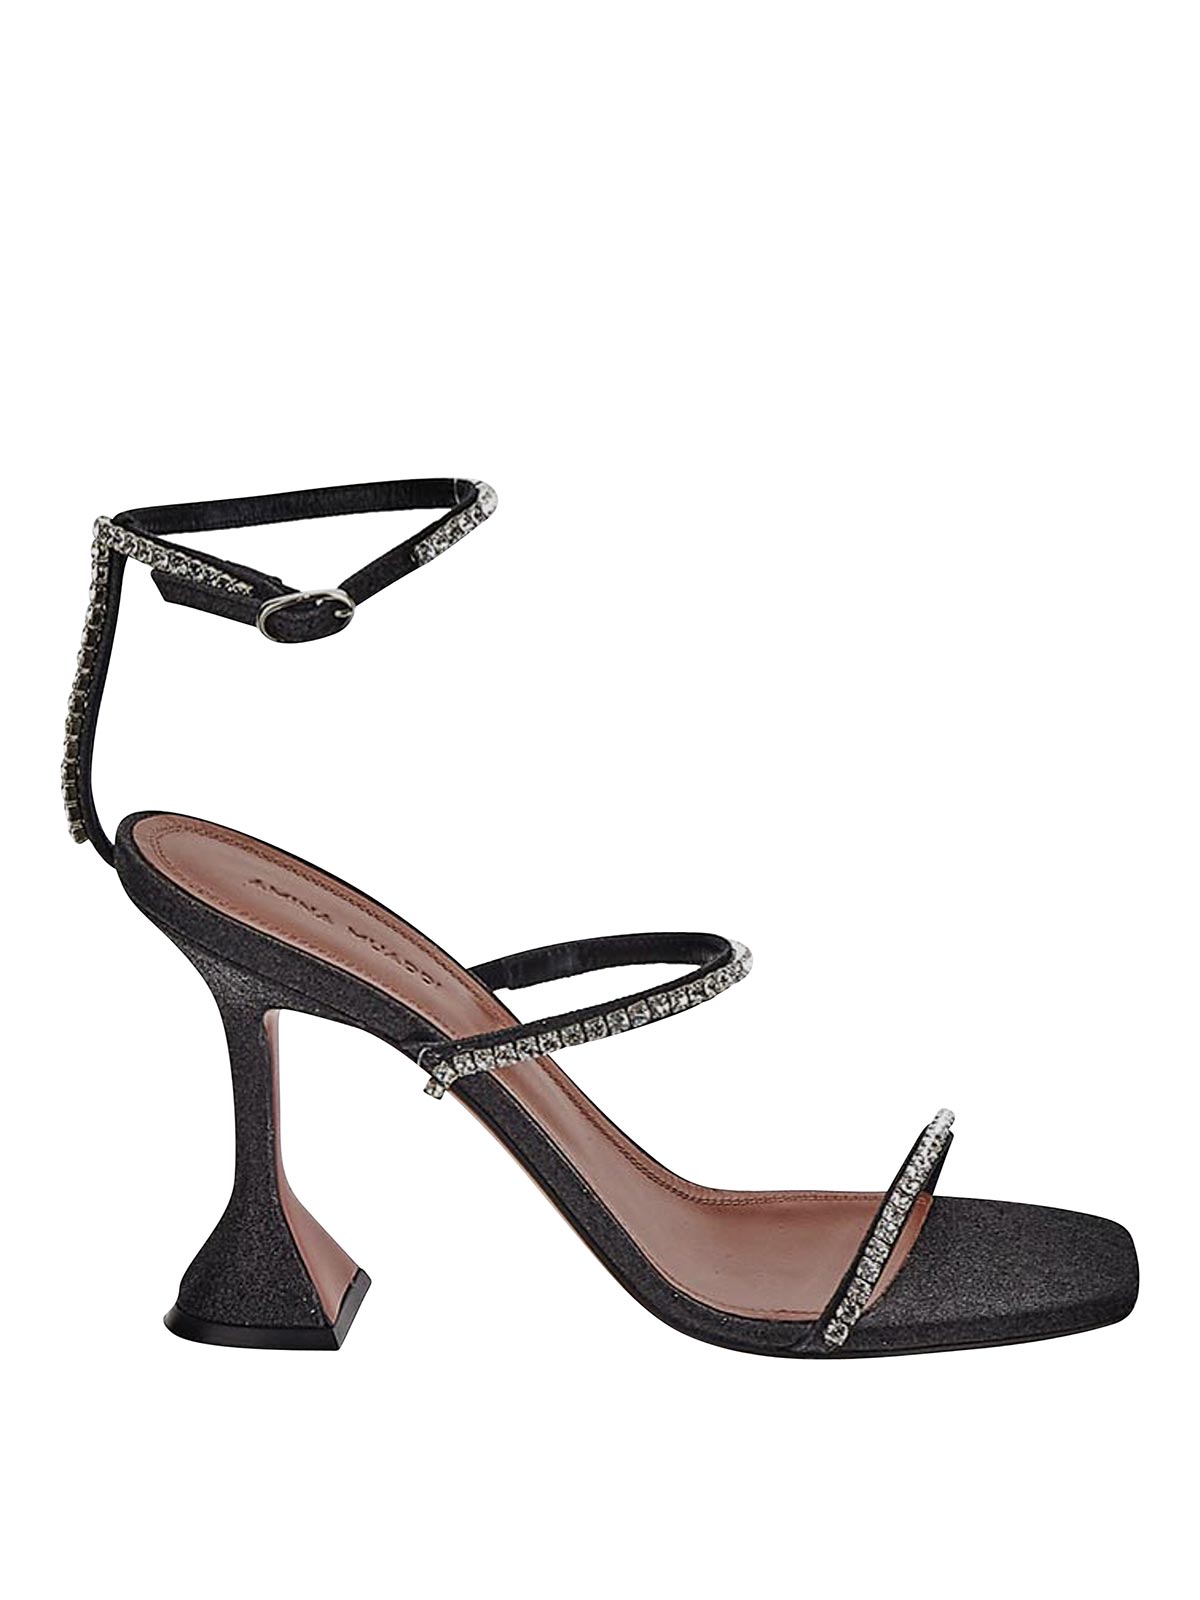 AMINA MUADDI SANDAL IN BLACK WITH ON THE STRAPS